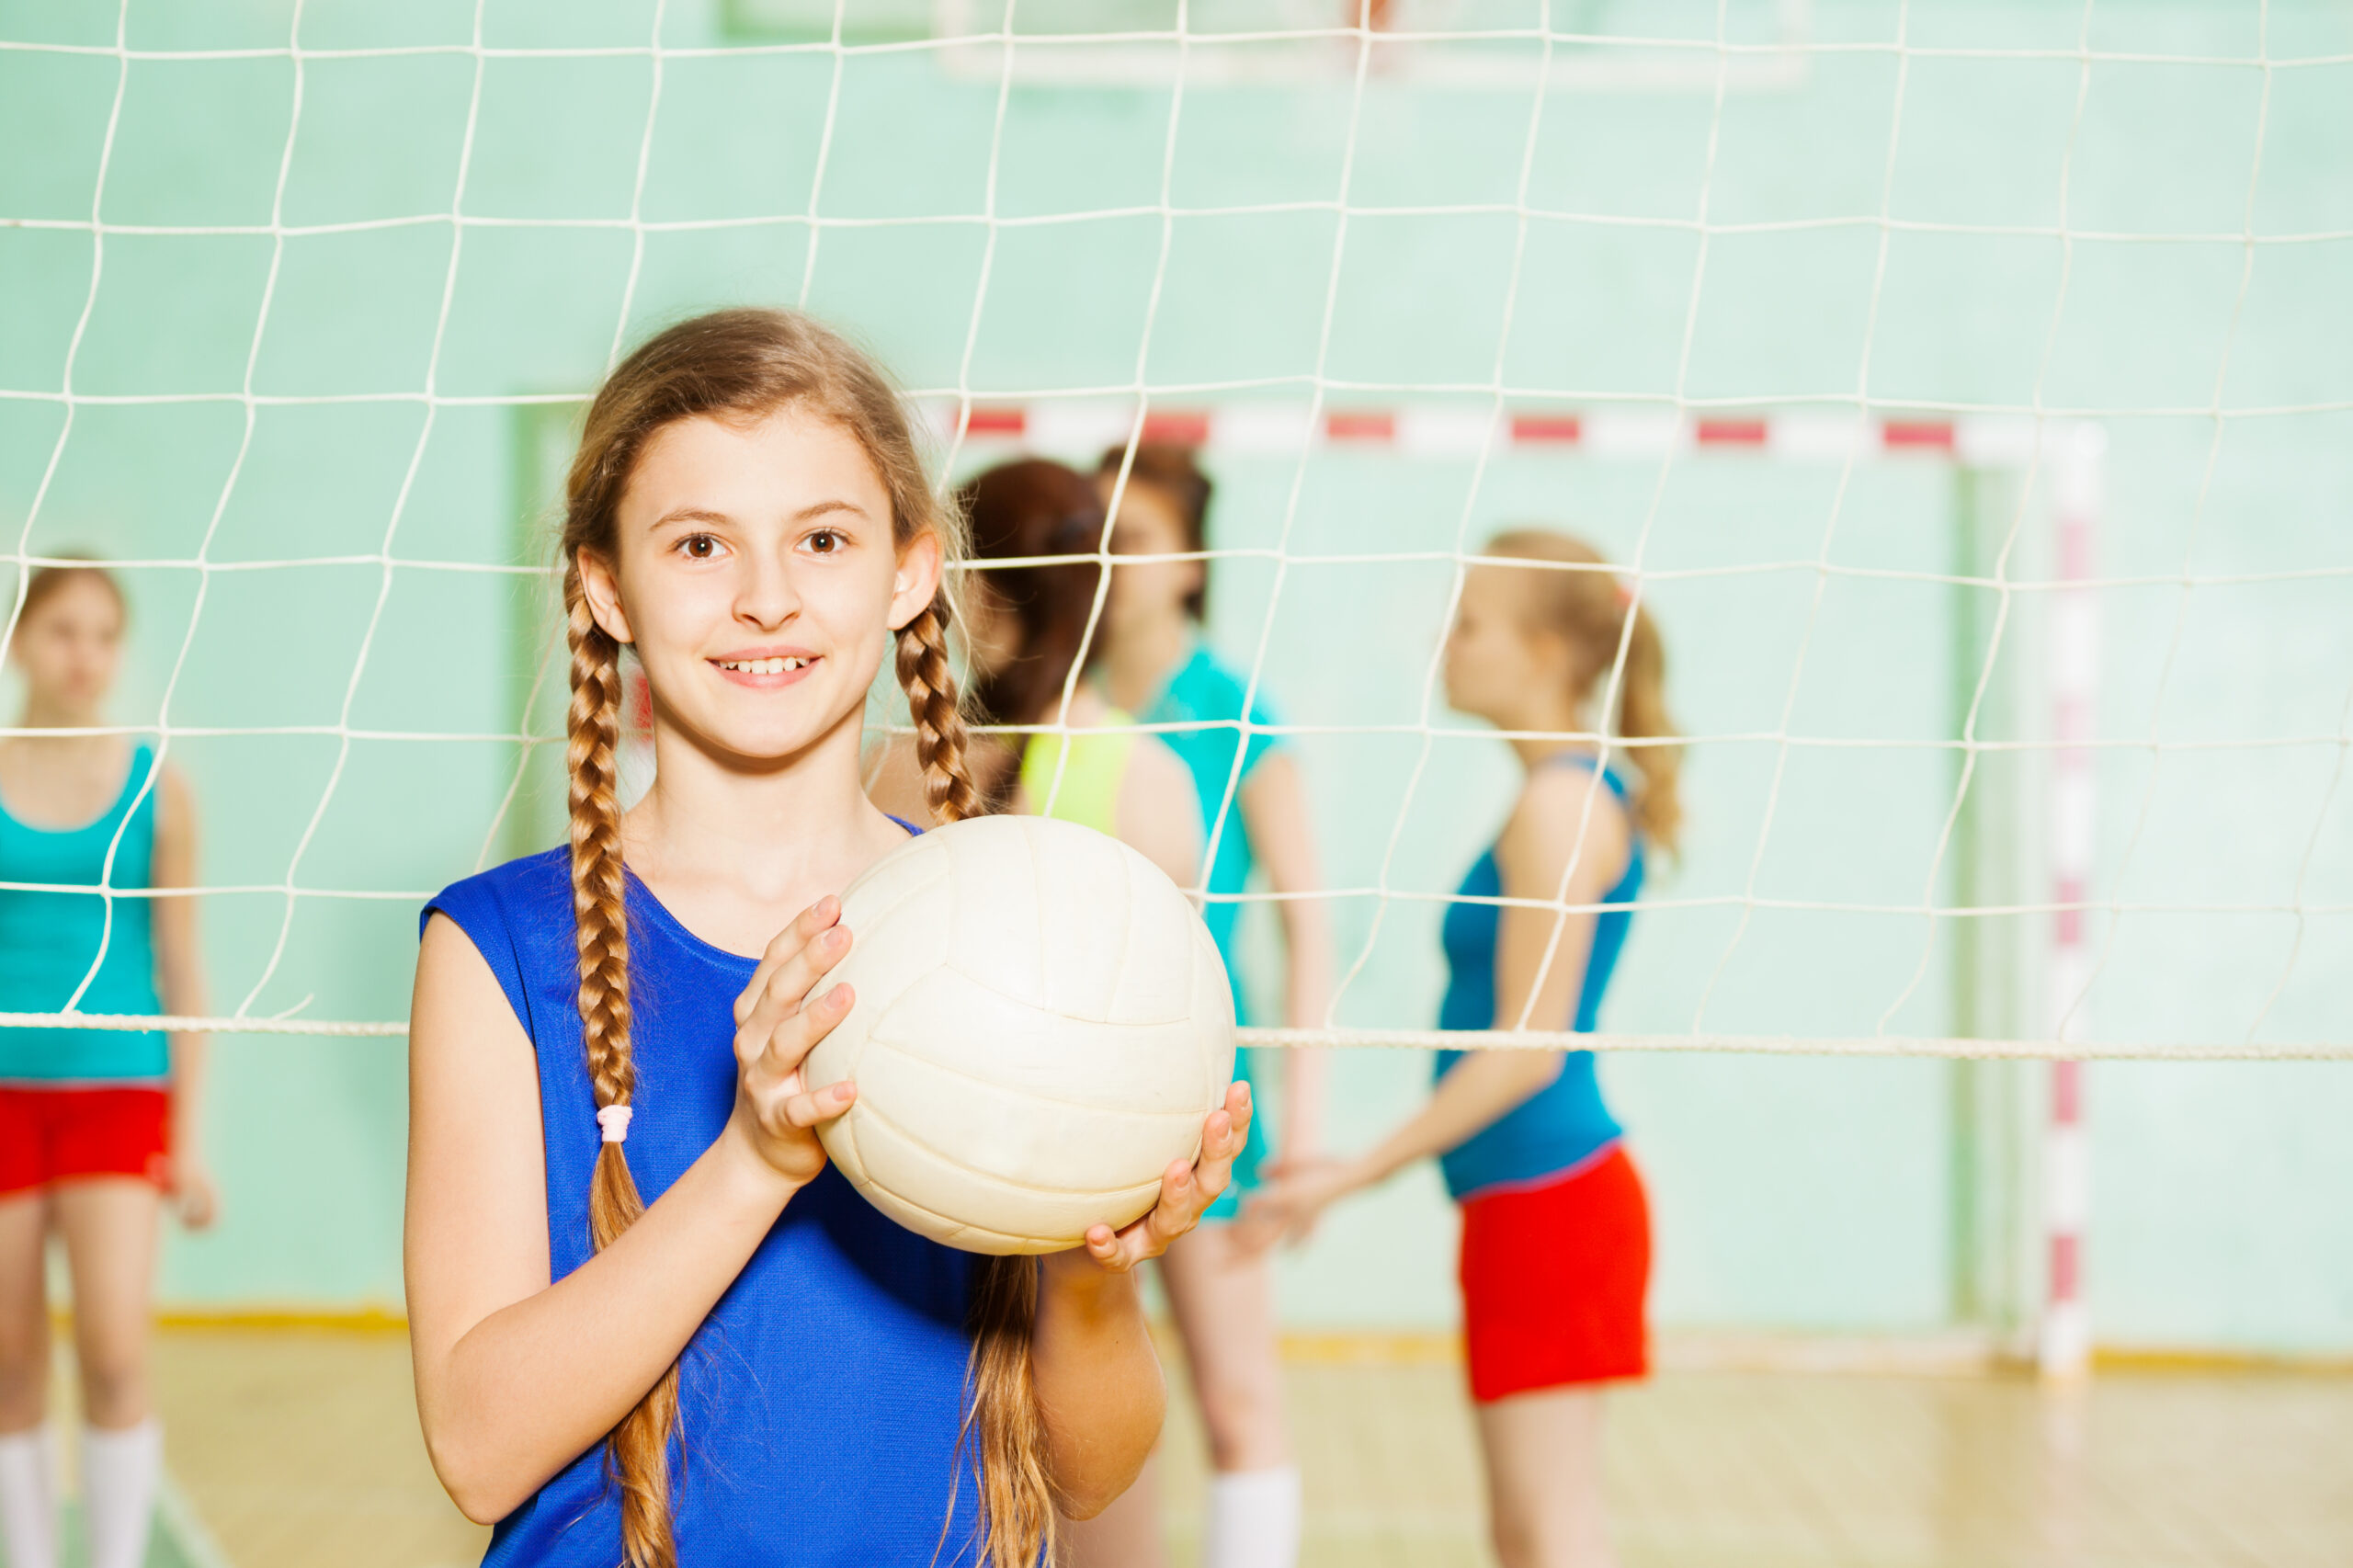 Parents: 3 Ways to Help Your Child Finish the Season Well! Pt. 1